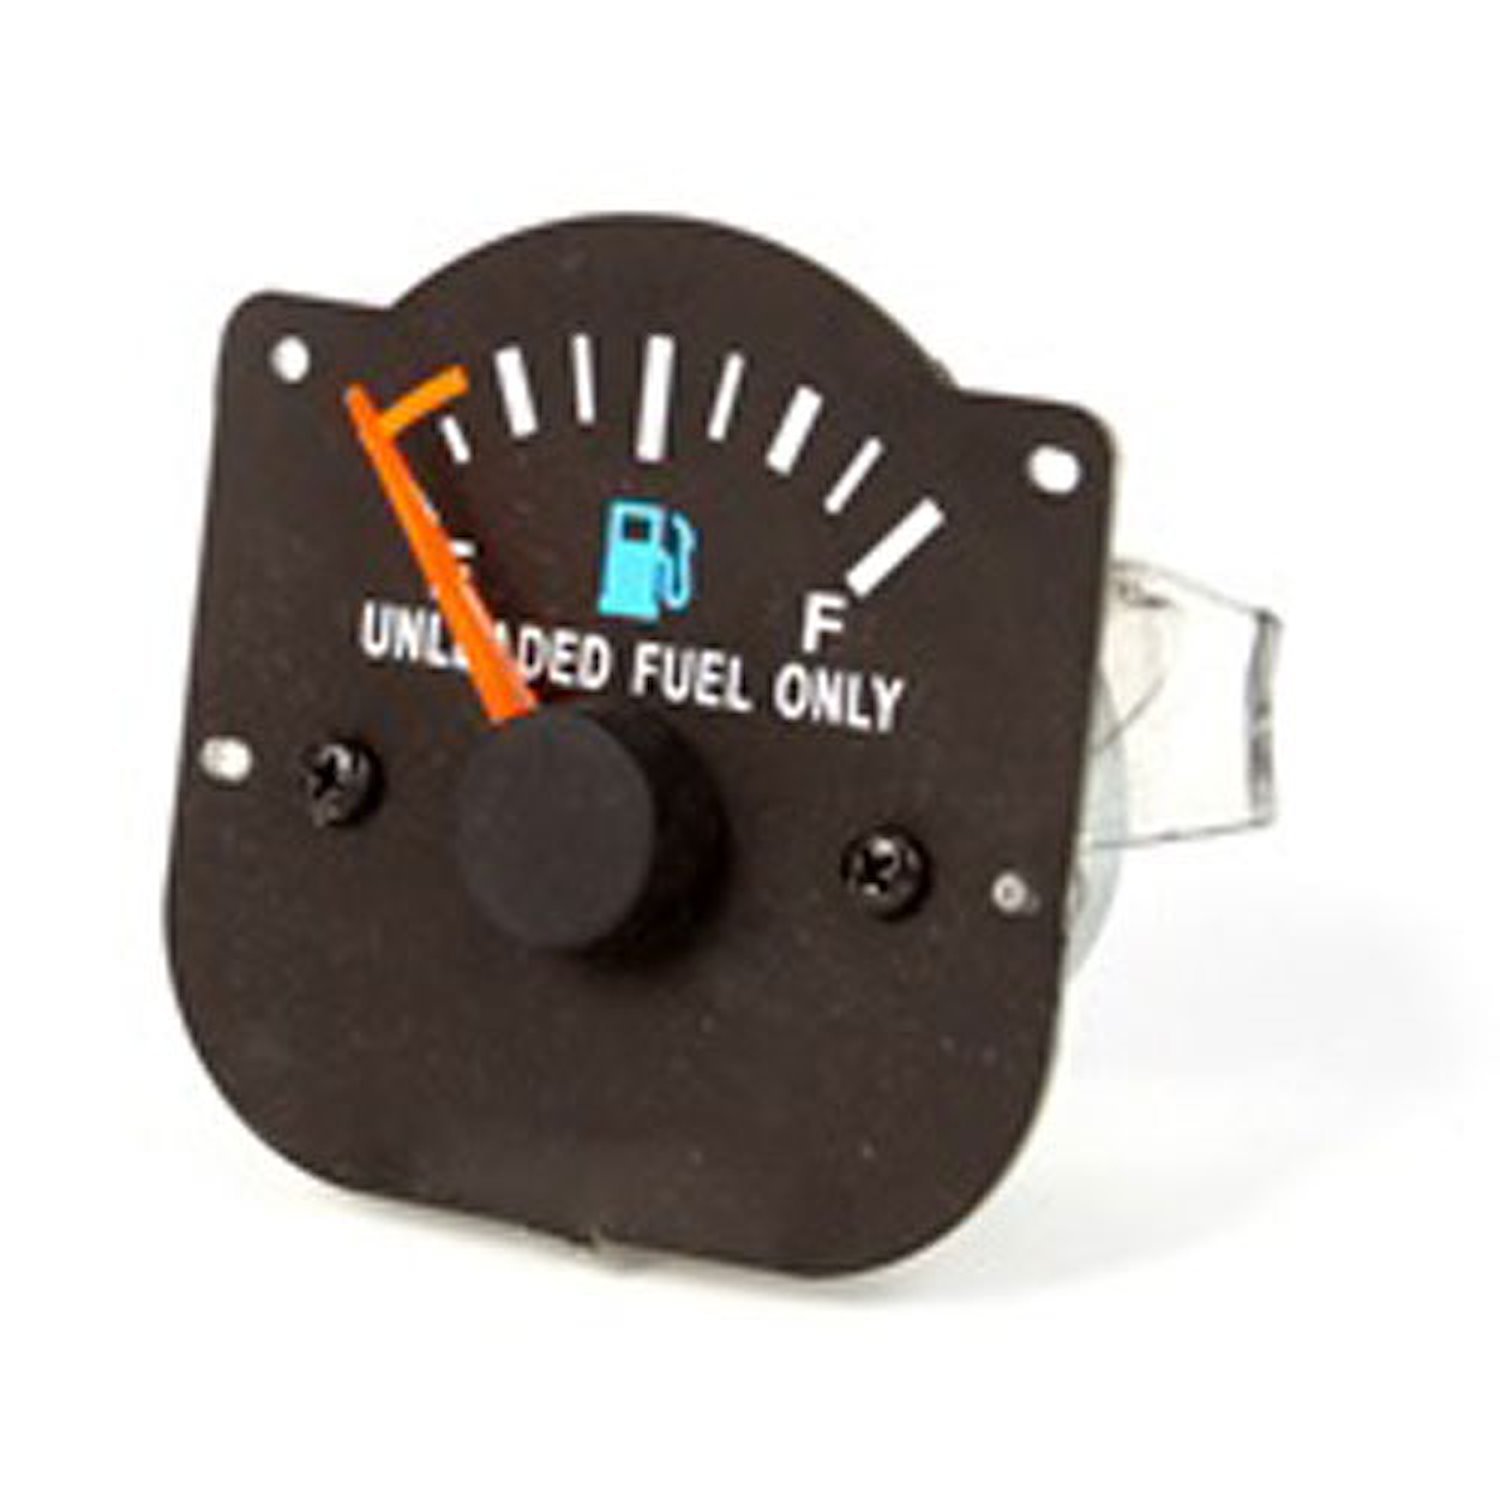 Replacement fuel gauge from Omix-ADA, Fits 92-95 Jeep Wranglers.